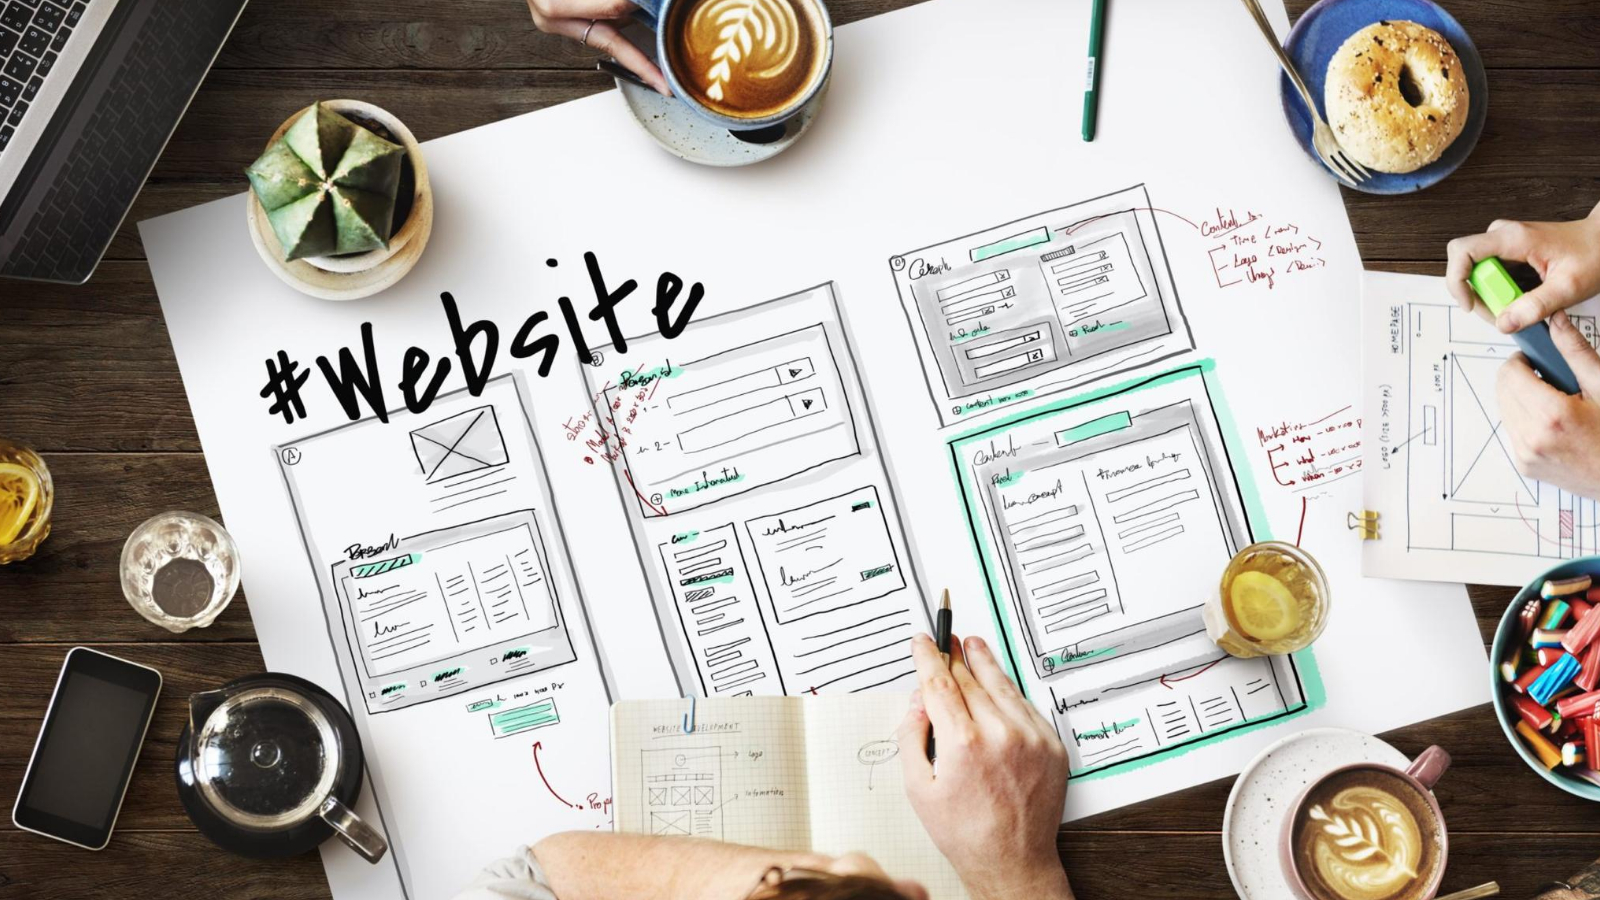 website development layout sketch with website elements and user flow noted